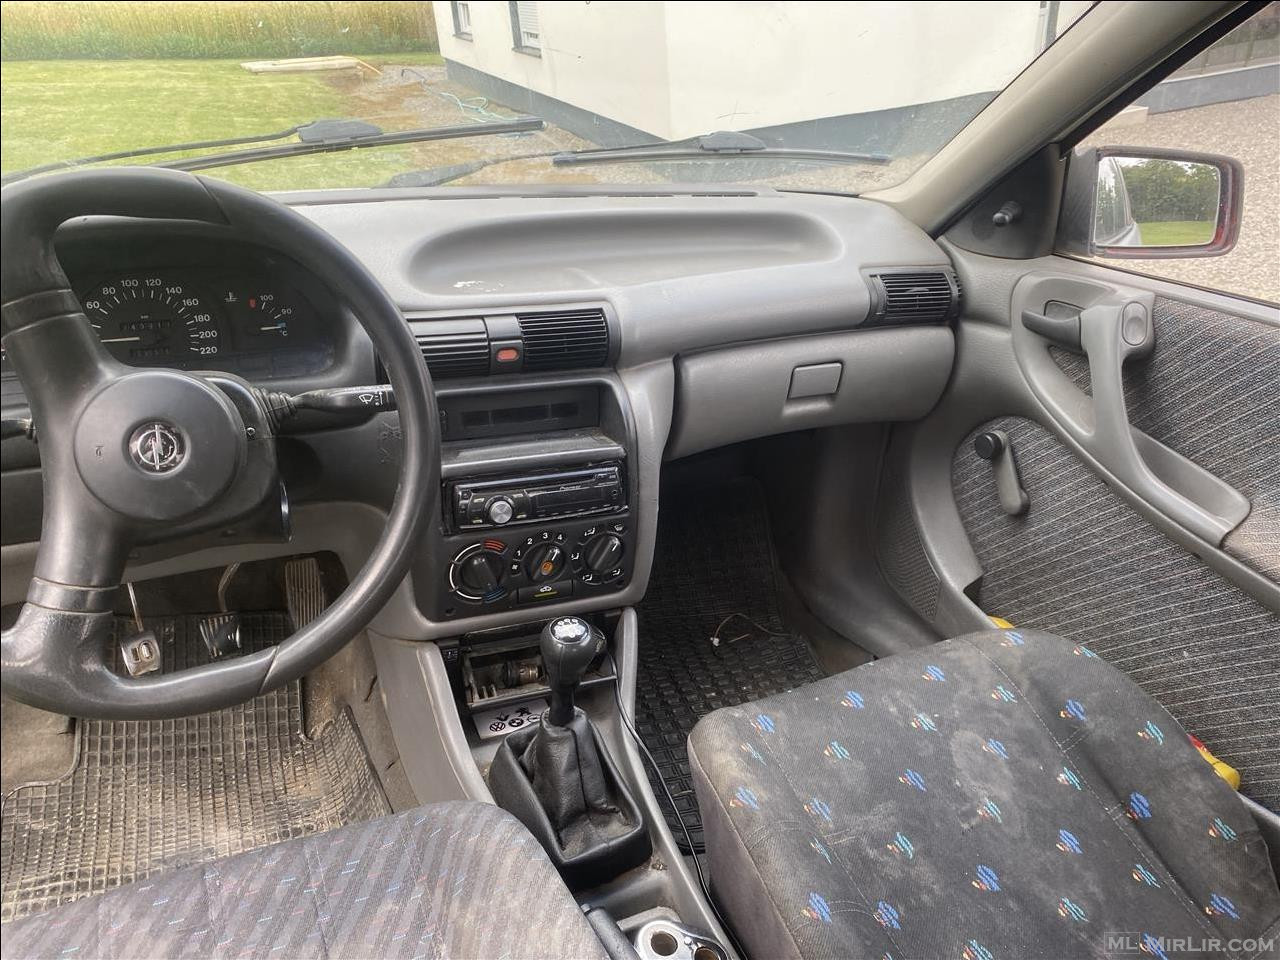 Shes Opel Astra 1.7 Disel